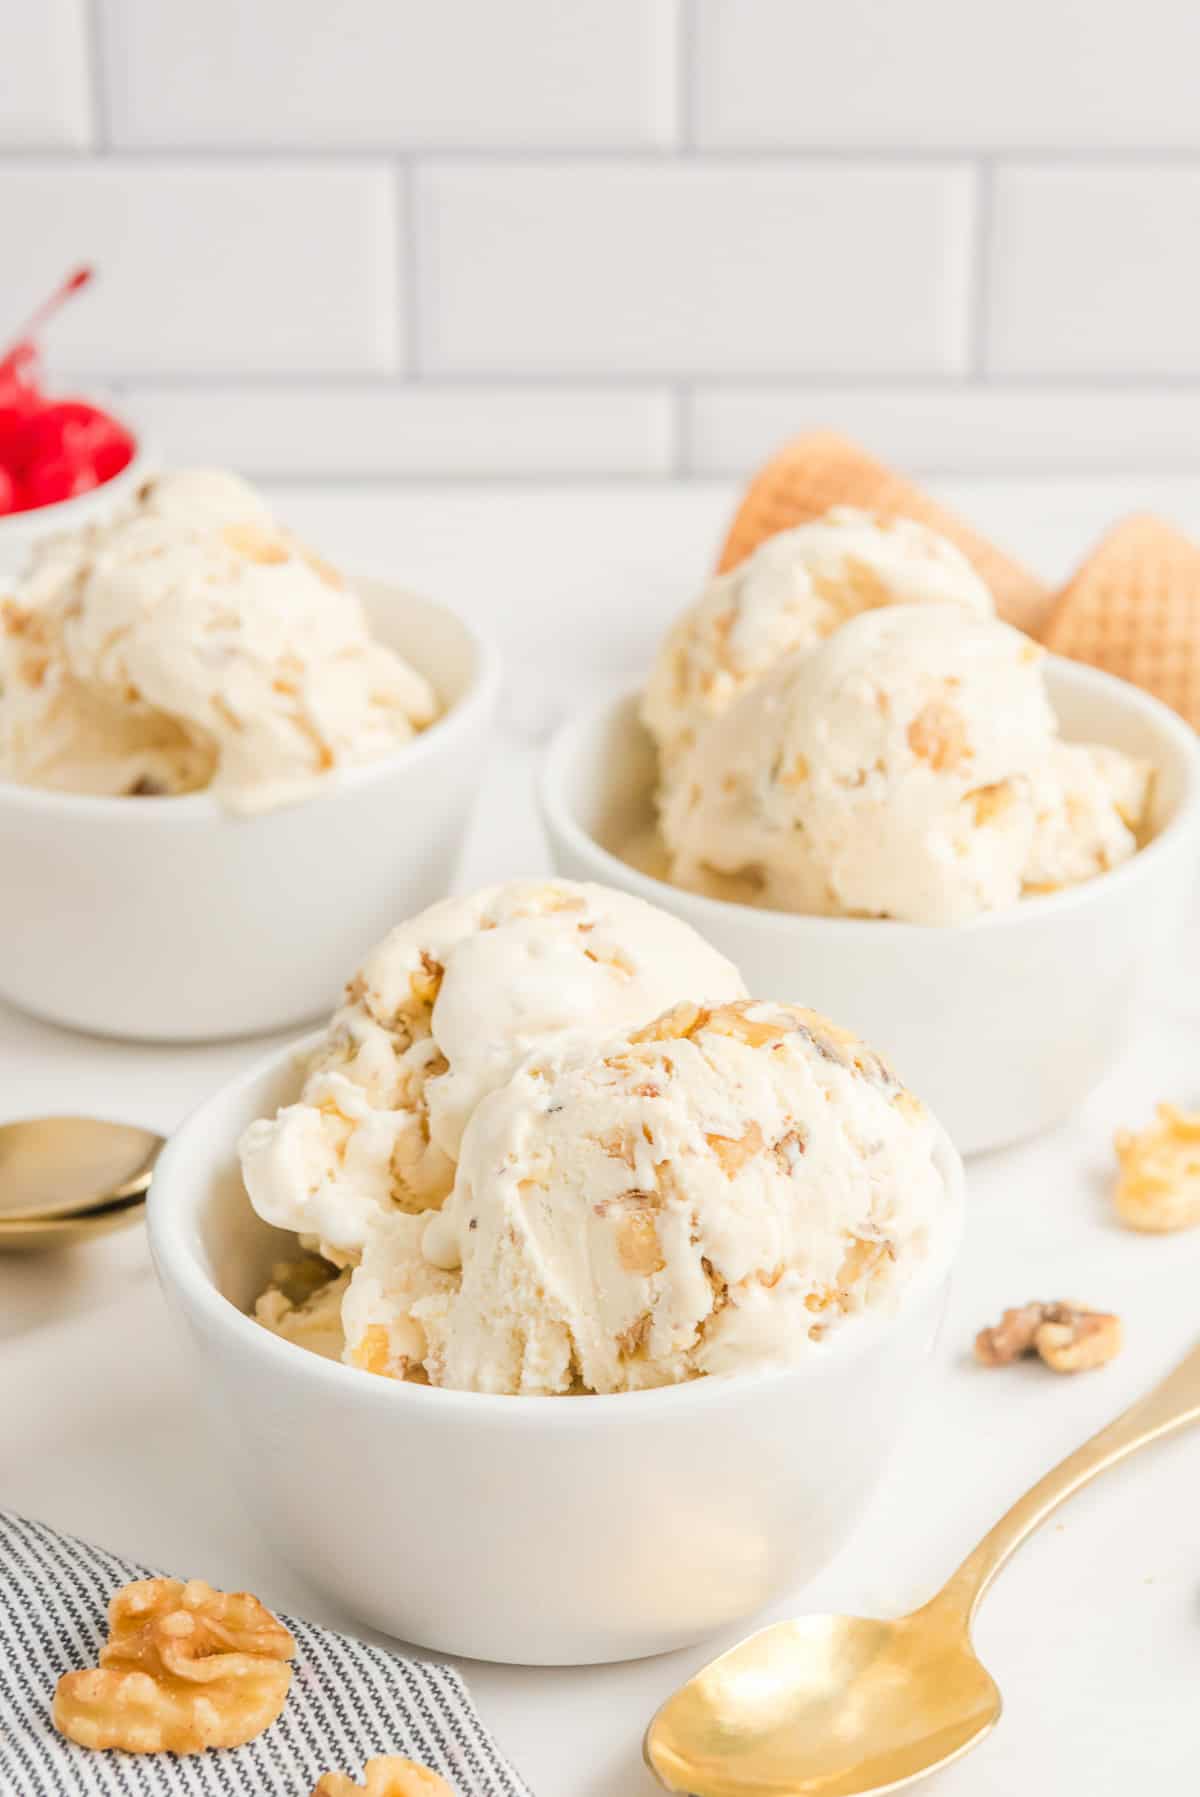 Maple walnut ice cream in three white bowls with a gold spoon and walnuts around them.